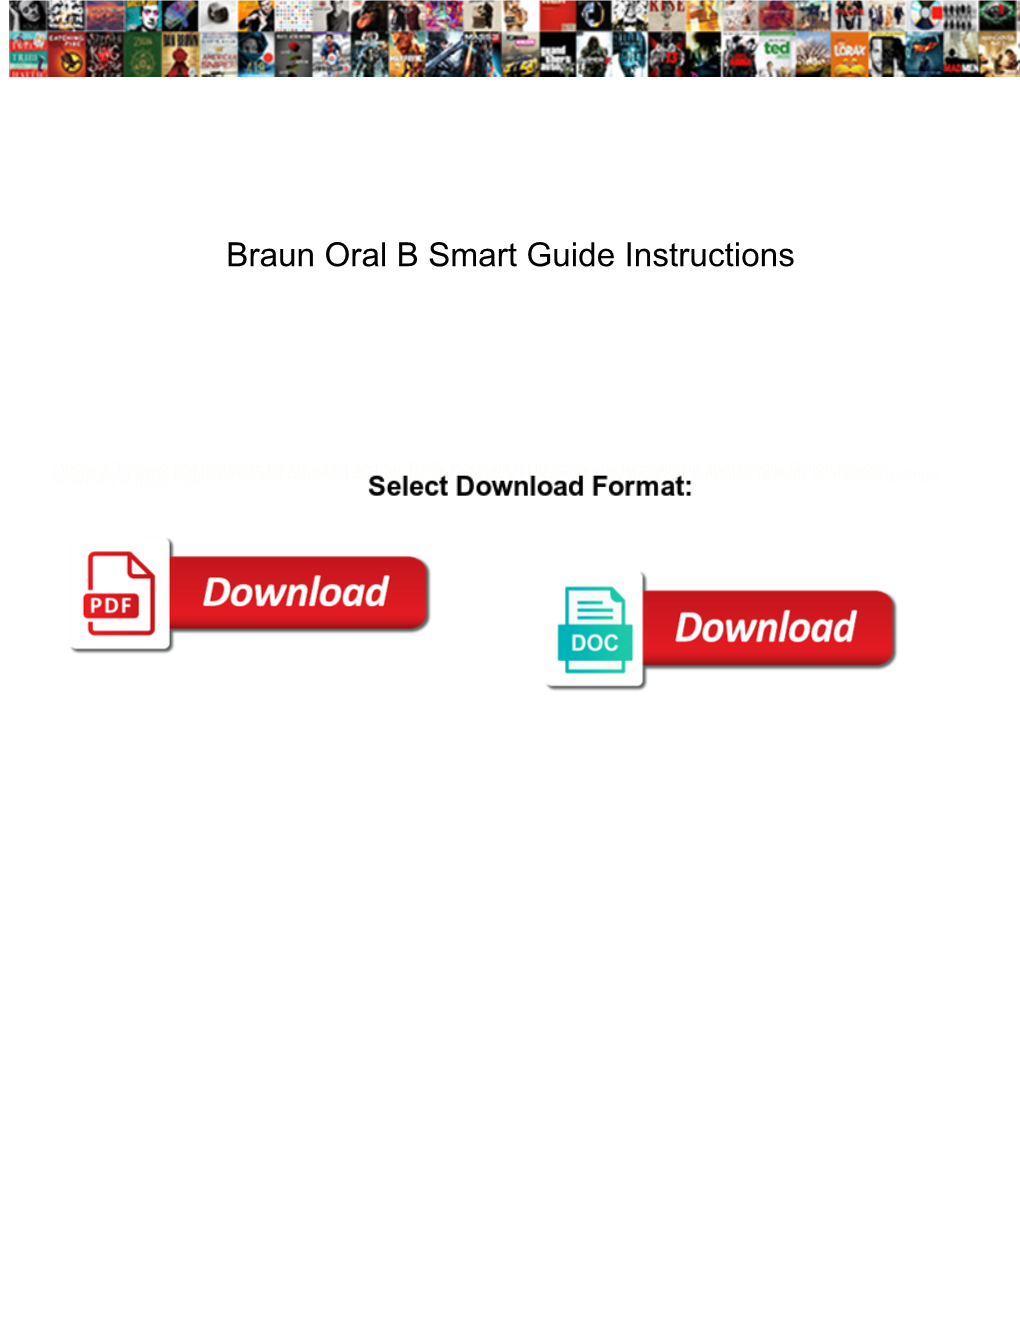 Braun Oral B Smart Guide Instructions